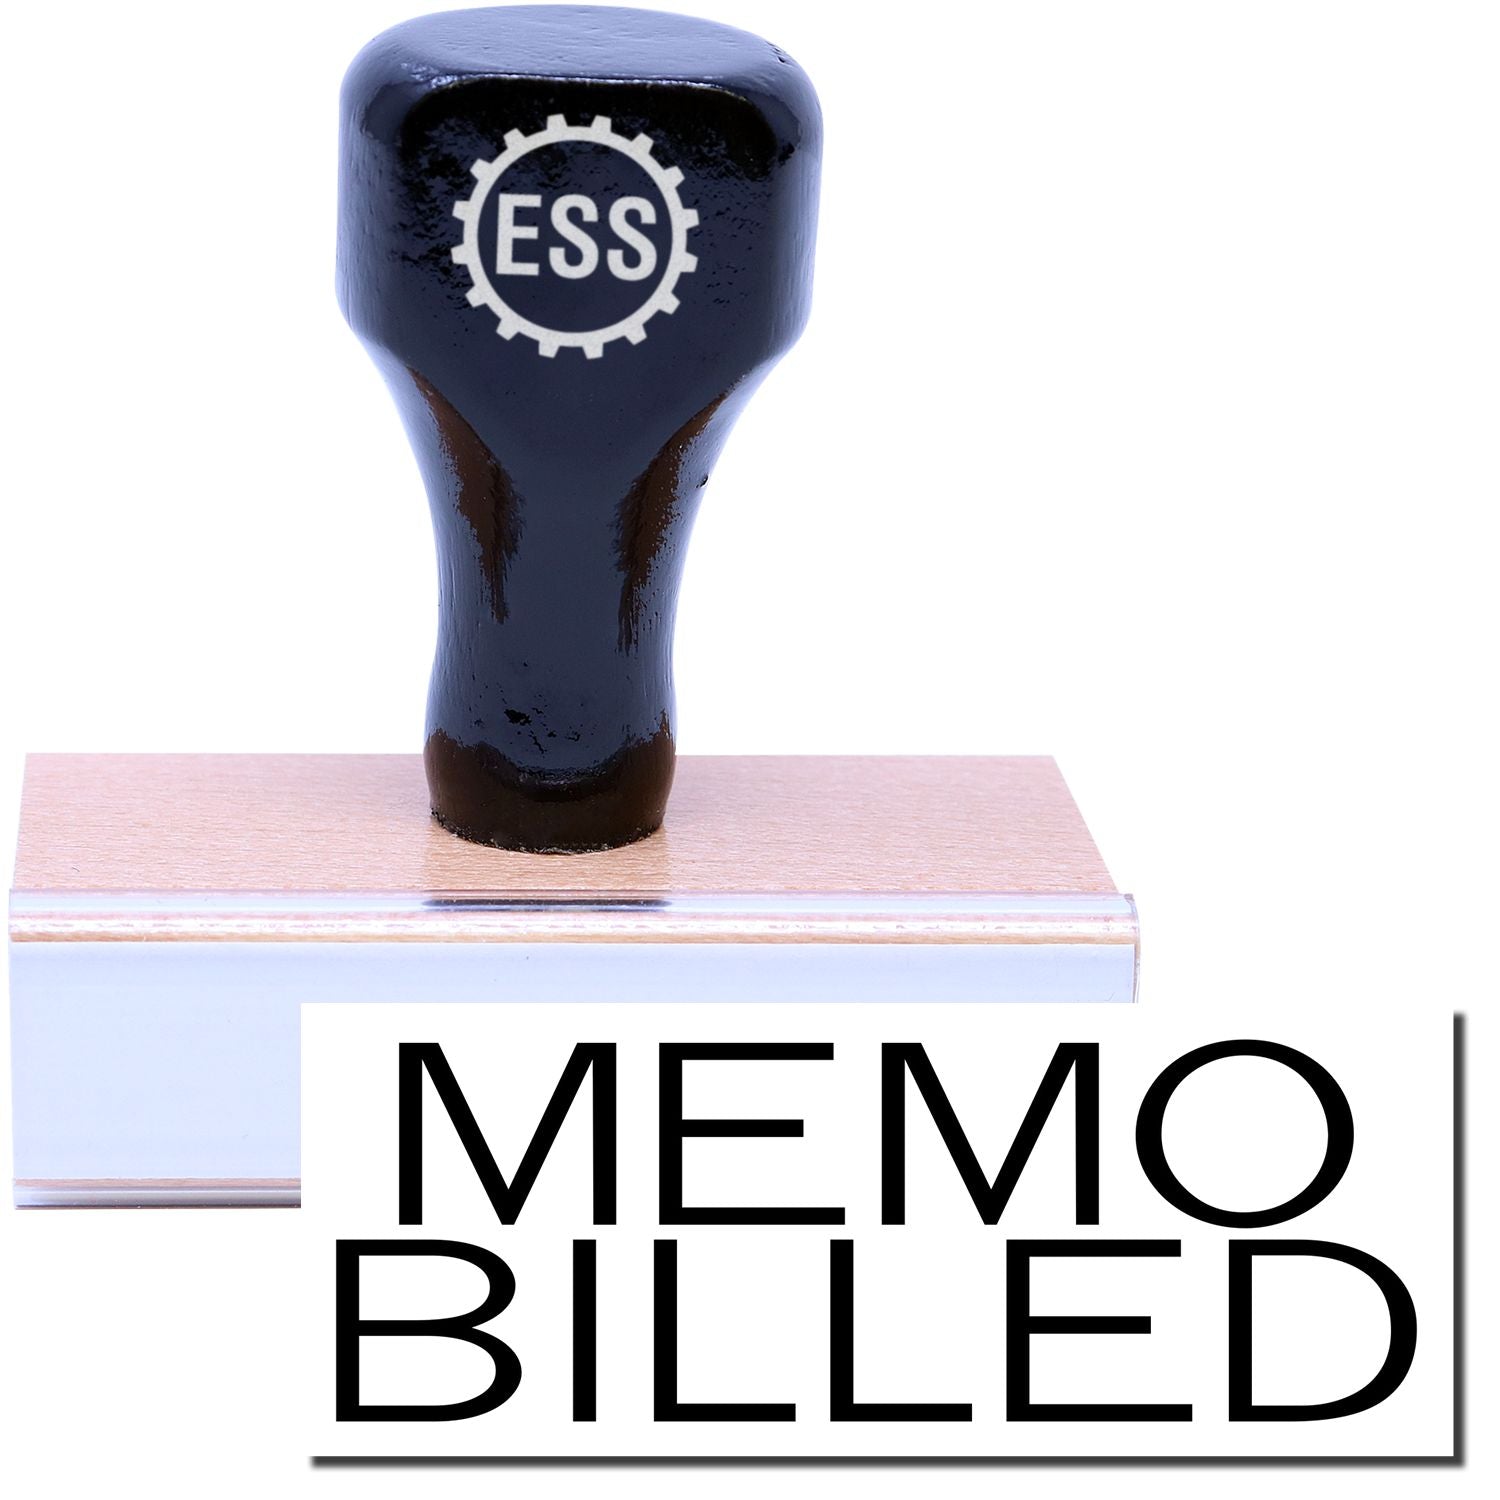 A stock office rubber stamp with a stamped image showing how the text "MEMO BILLED" is displayed after stamping.